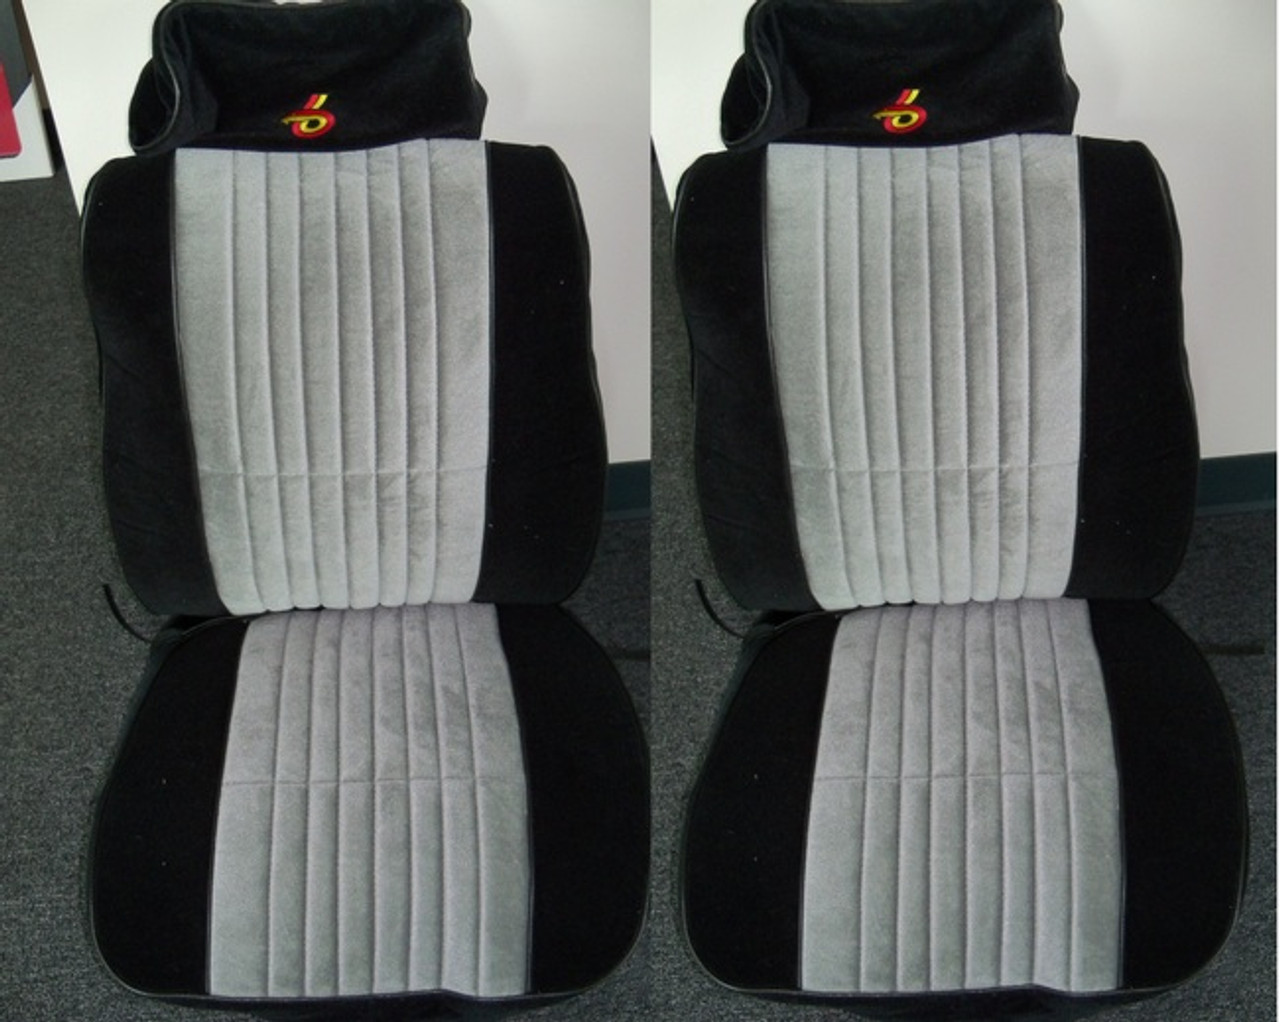 1987 Grand National velour seat covers sold by Highway Stars includes the embroidered headrests. 